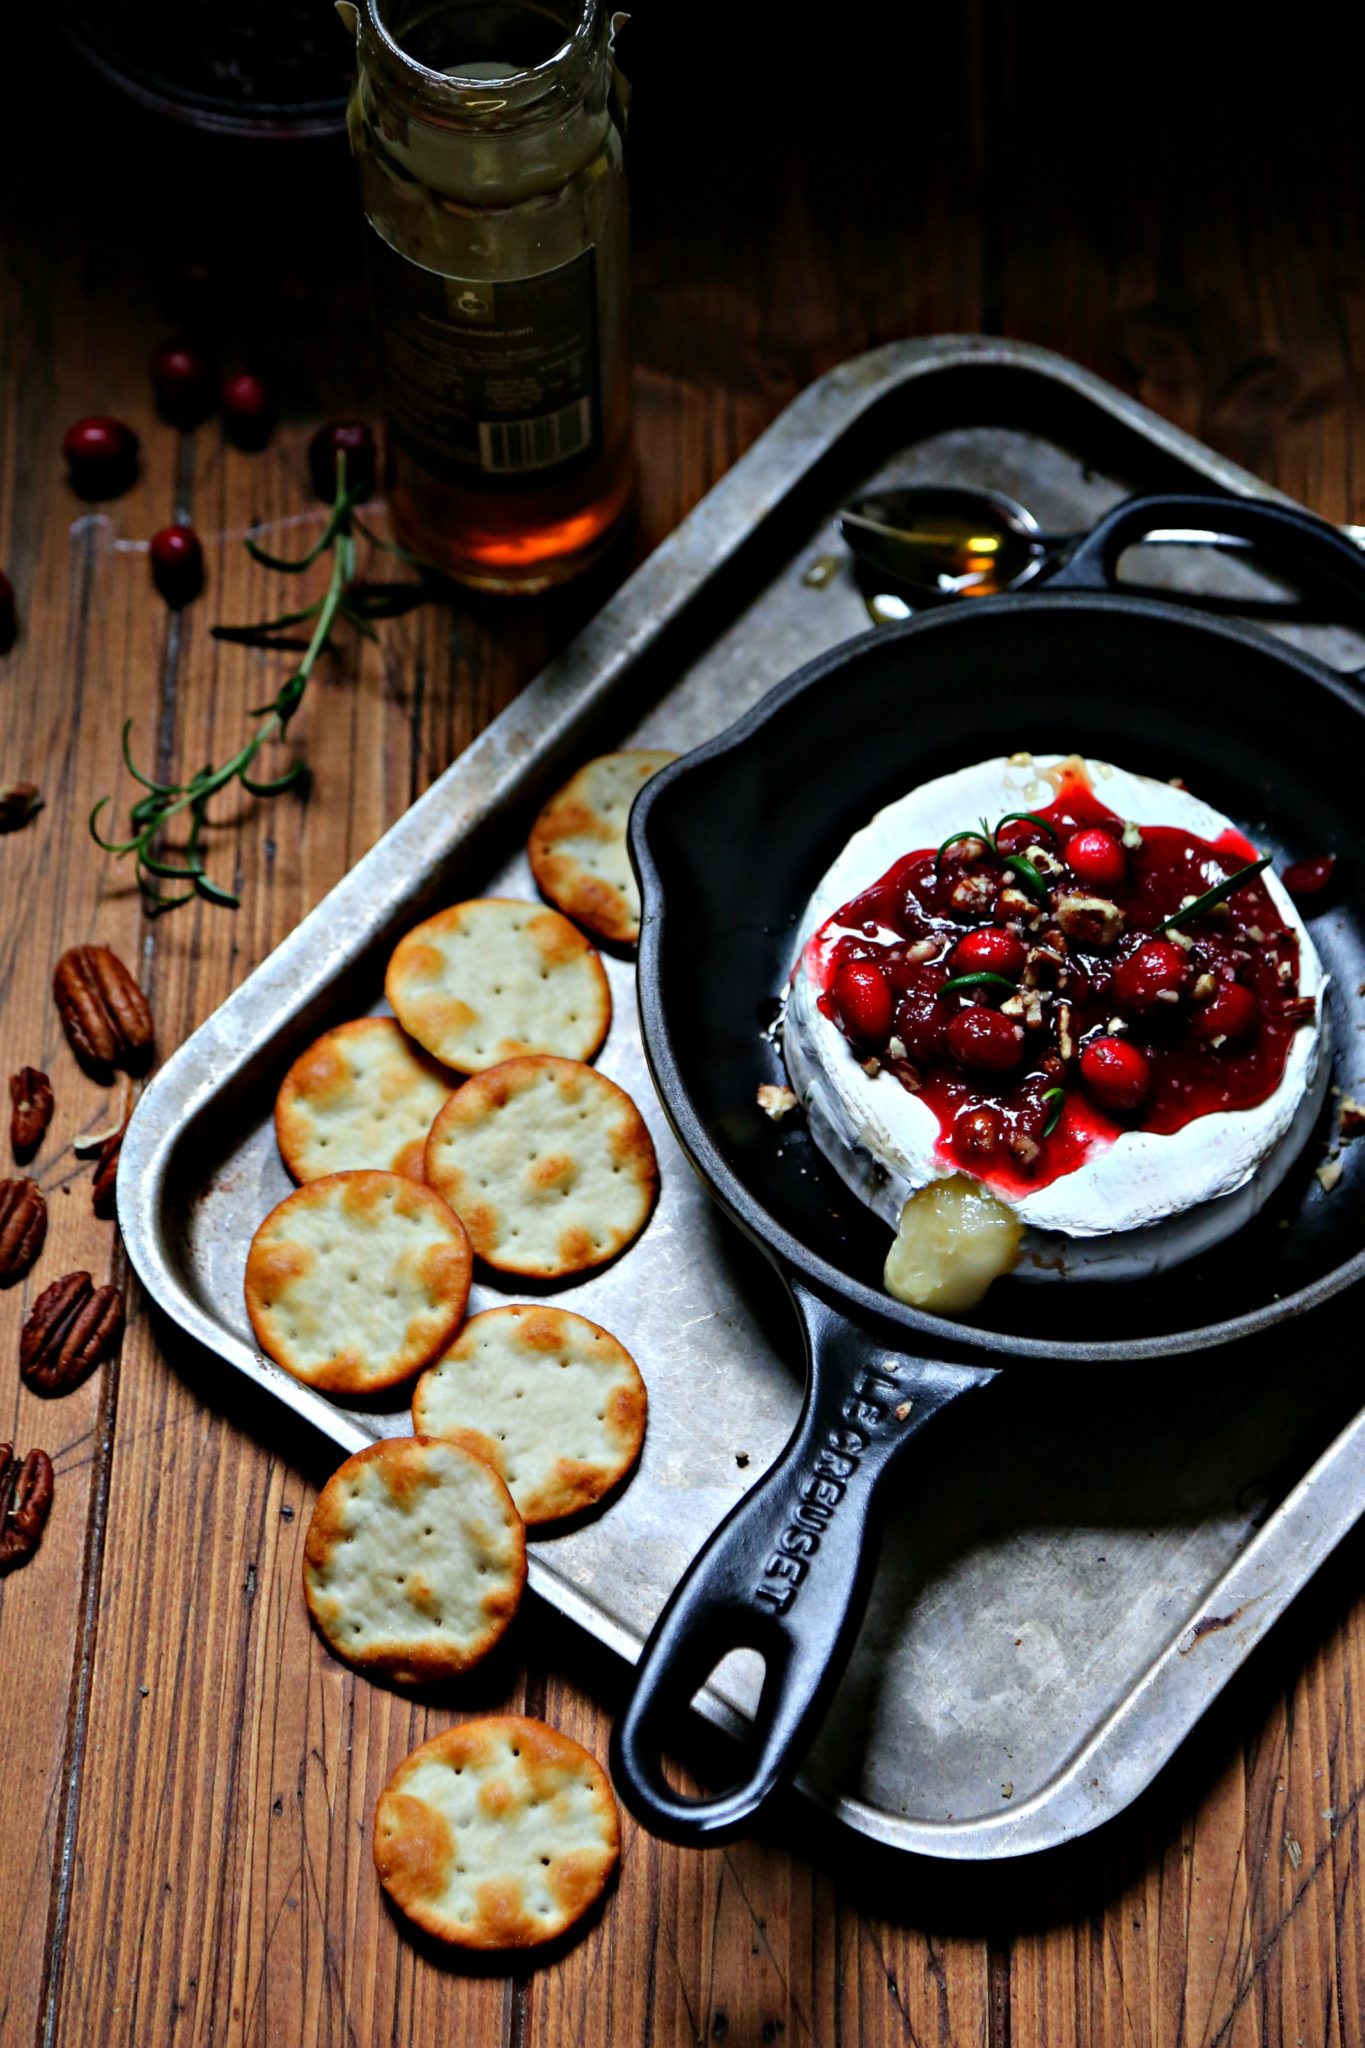 Baked Brie Skillet (Recipe & Tips) - Cast Iron Recipes